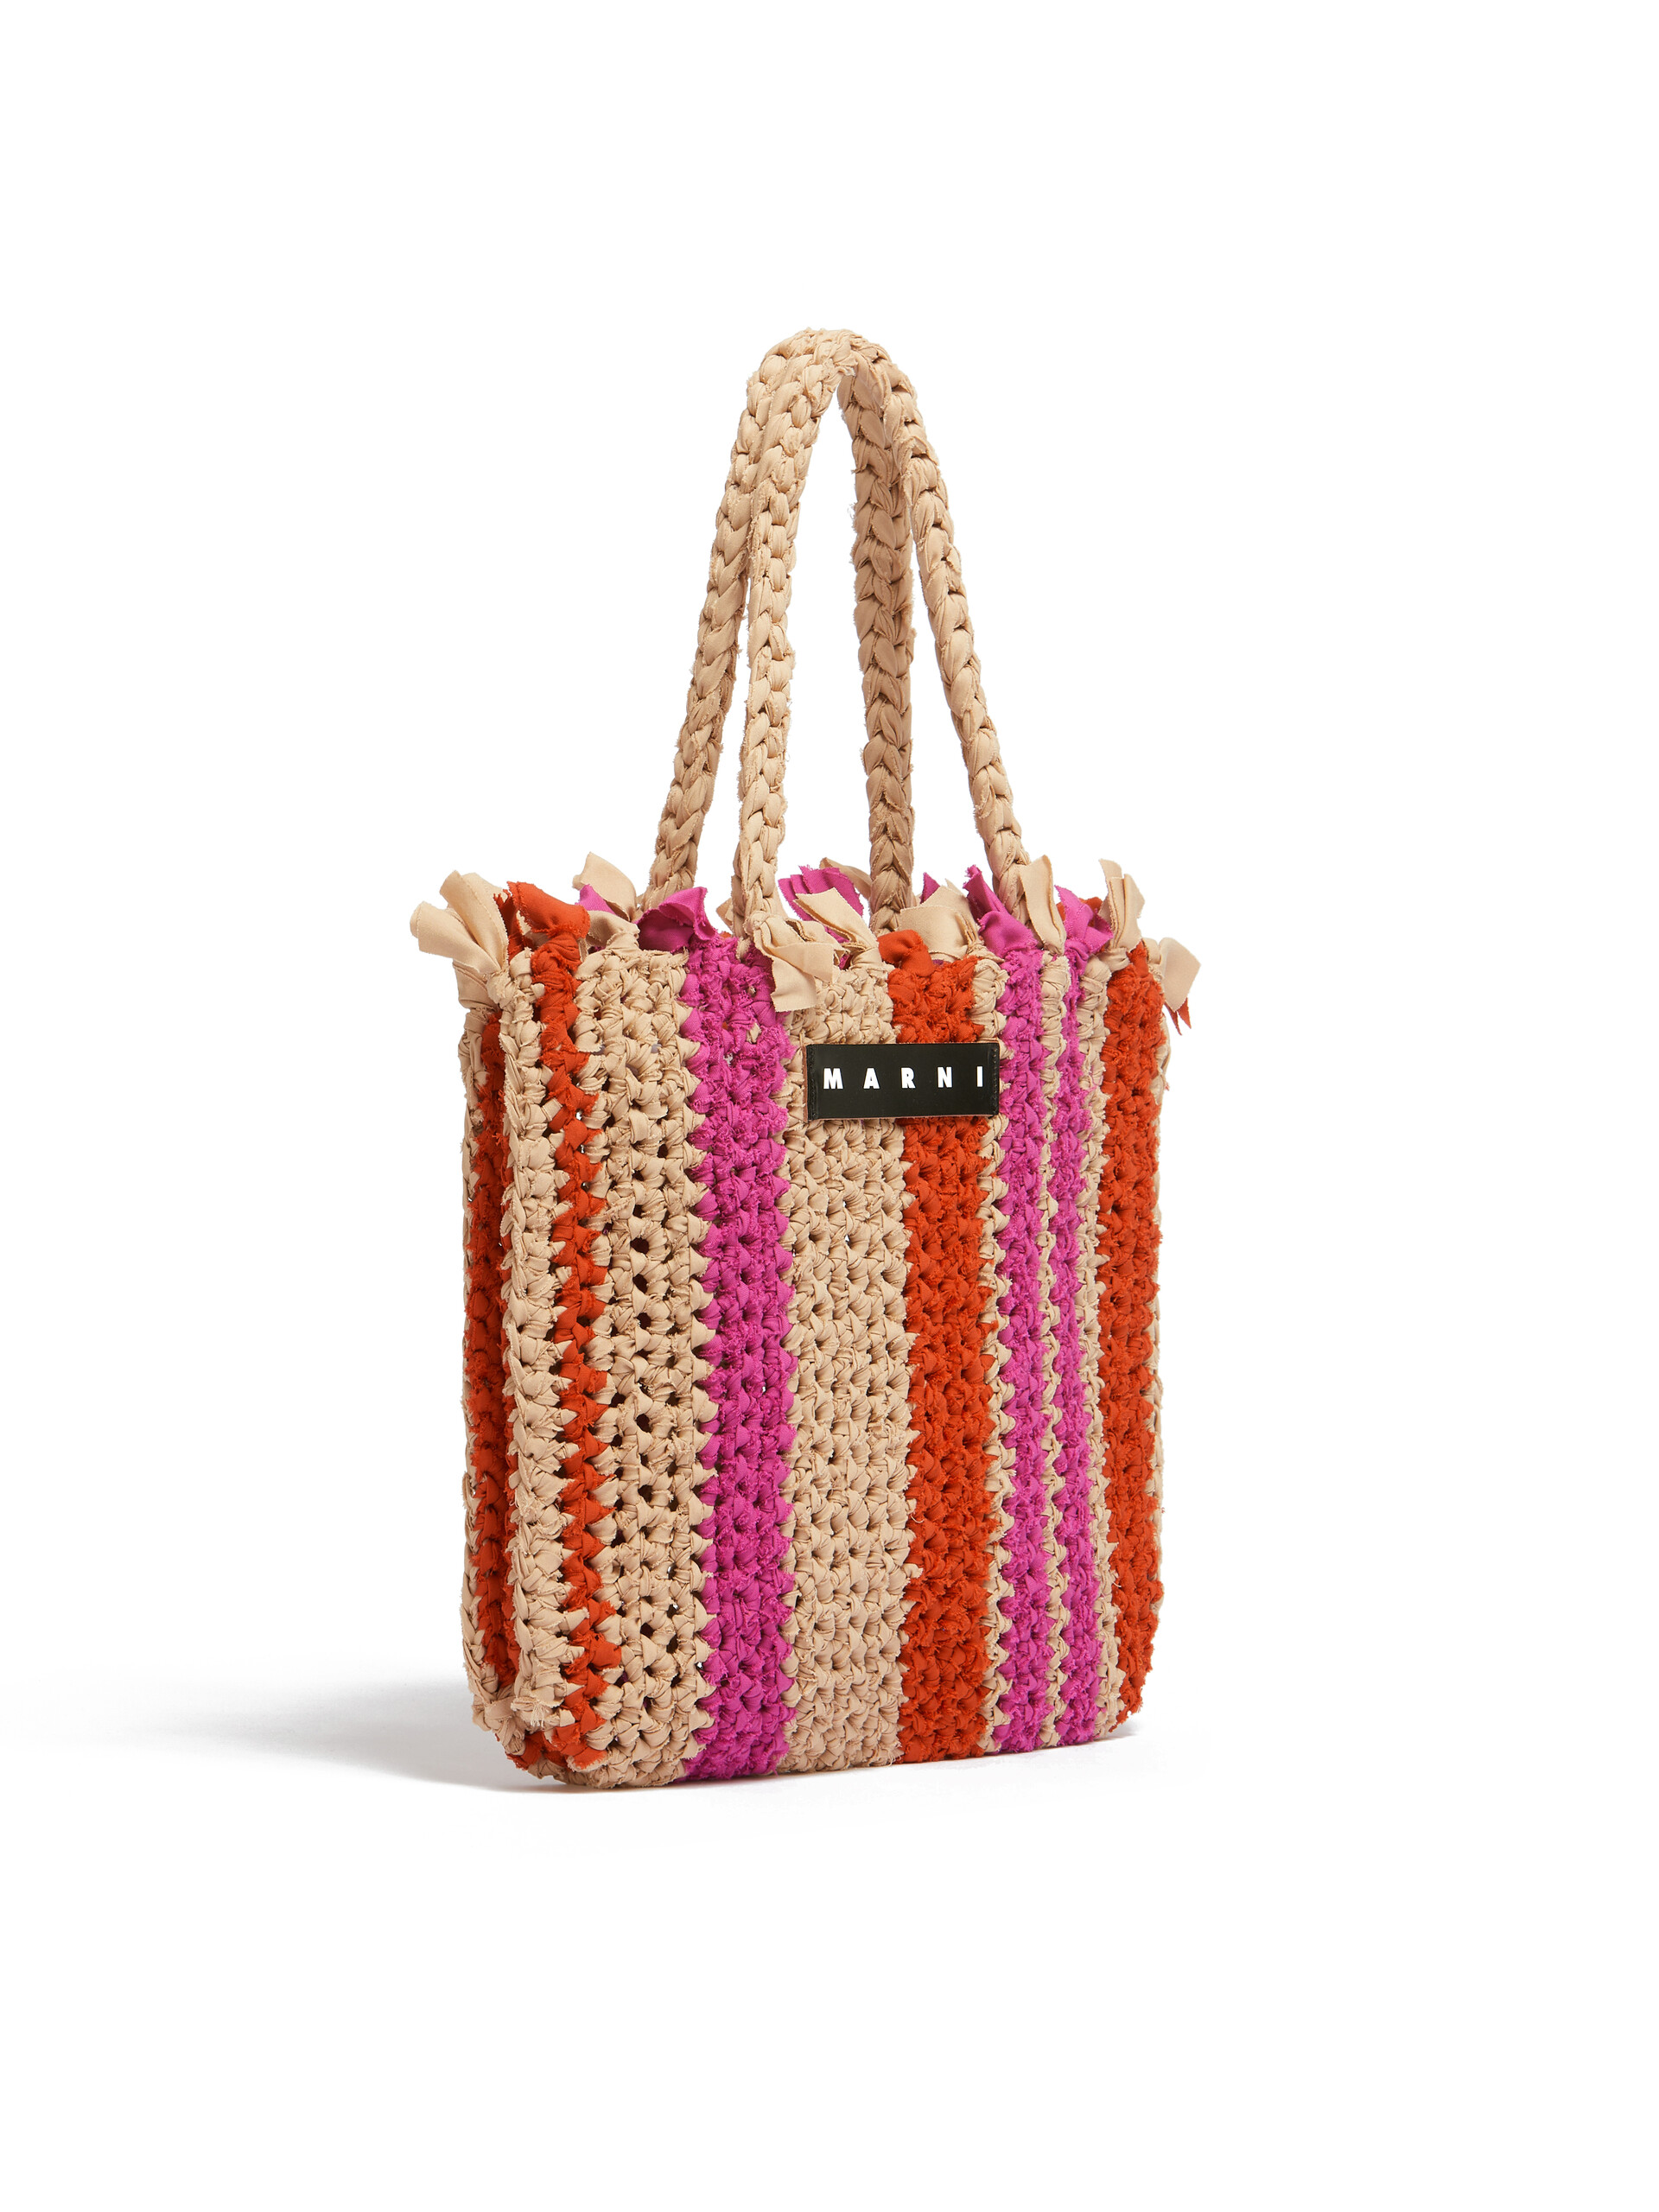 MARNI MARKET JERSEY bag in pink and blue cotton - Shopping Bags - Image 2